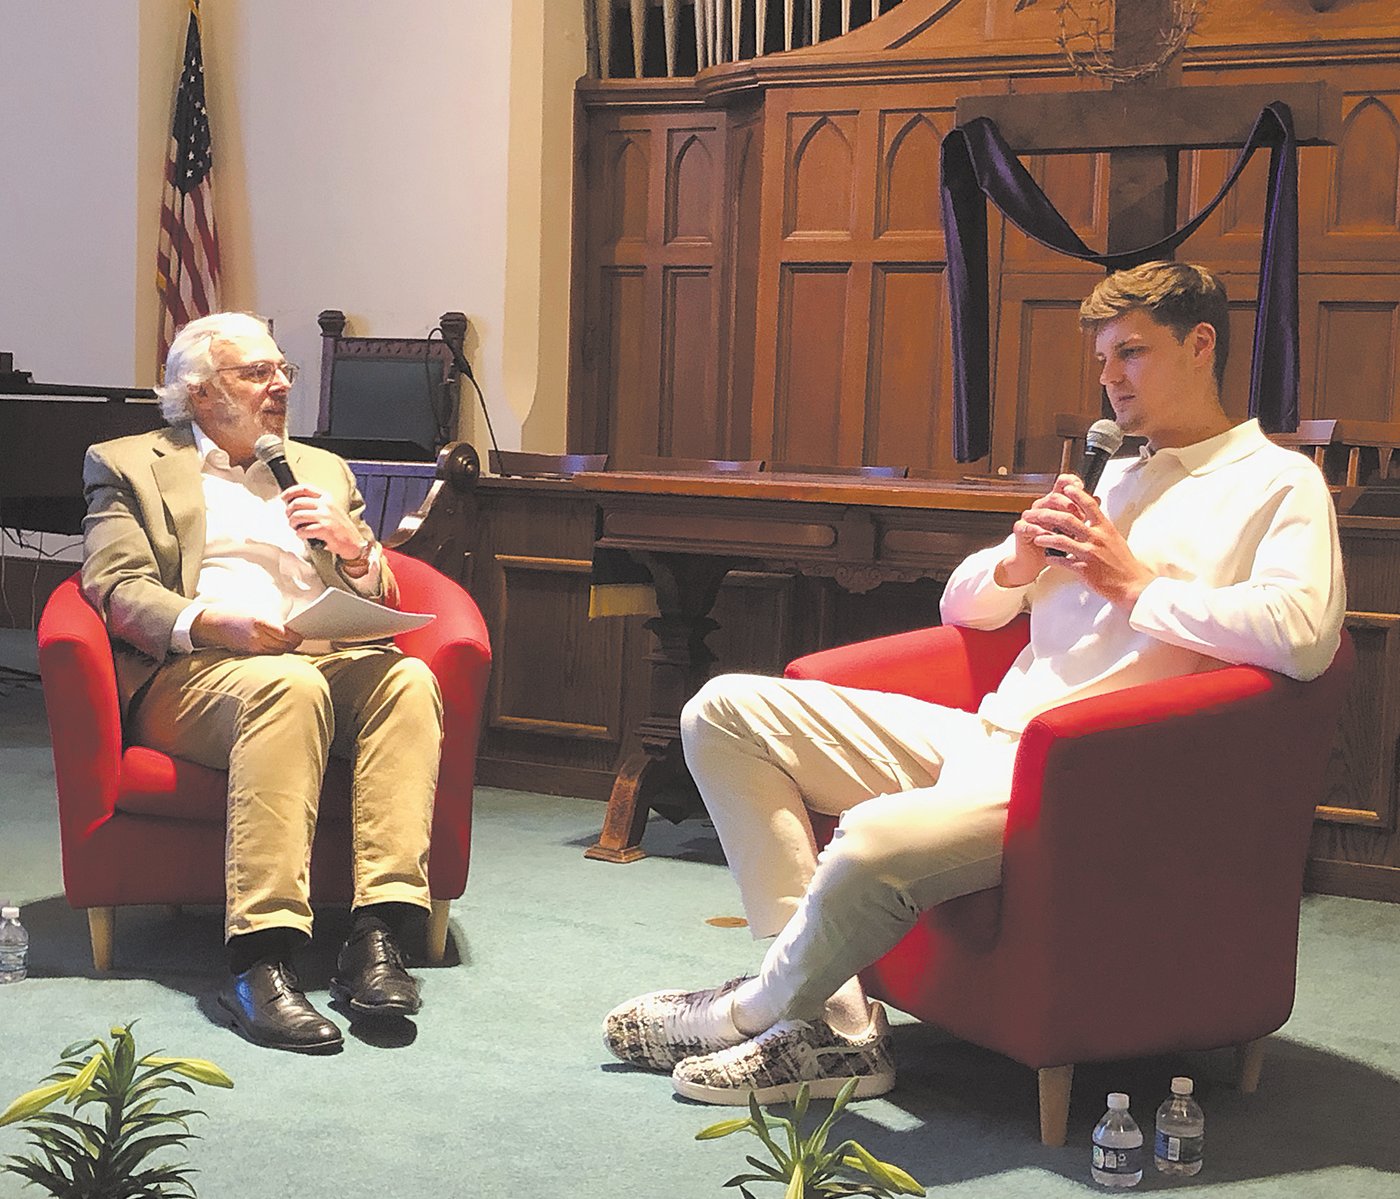 The Rev. John Van Nuys, left, talks Sunday with former Indiana University men's basketball player Miller Kopp about his athletic career and his faith at Wabash Avenue Presbyterian Church.